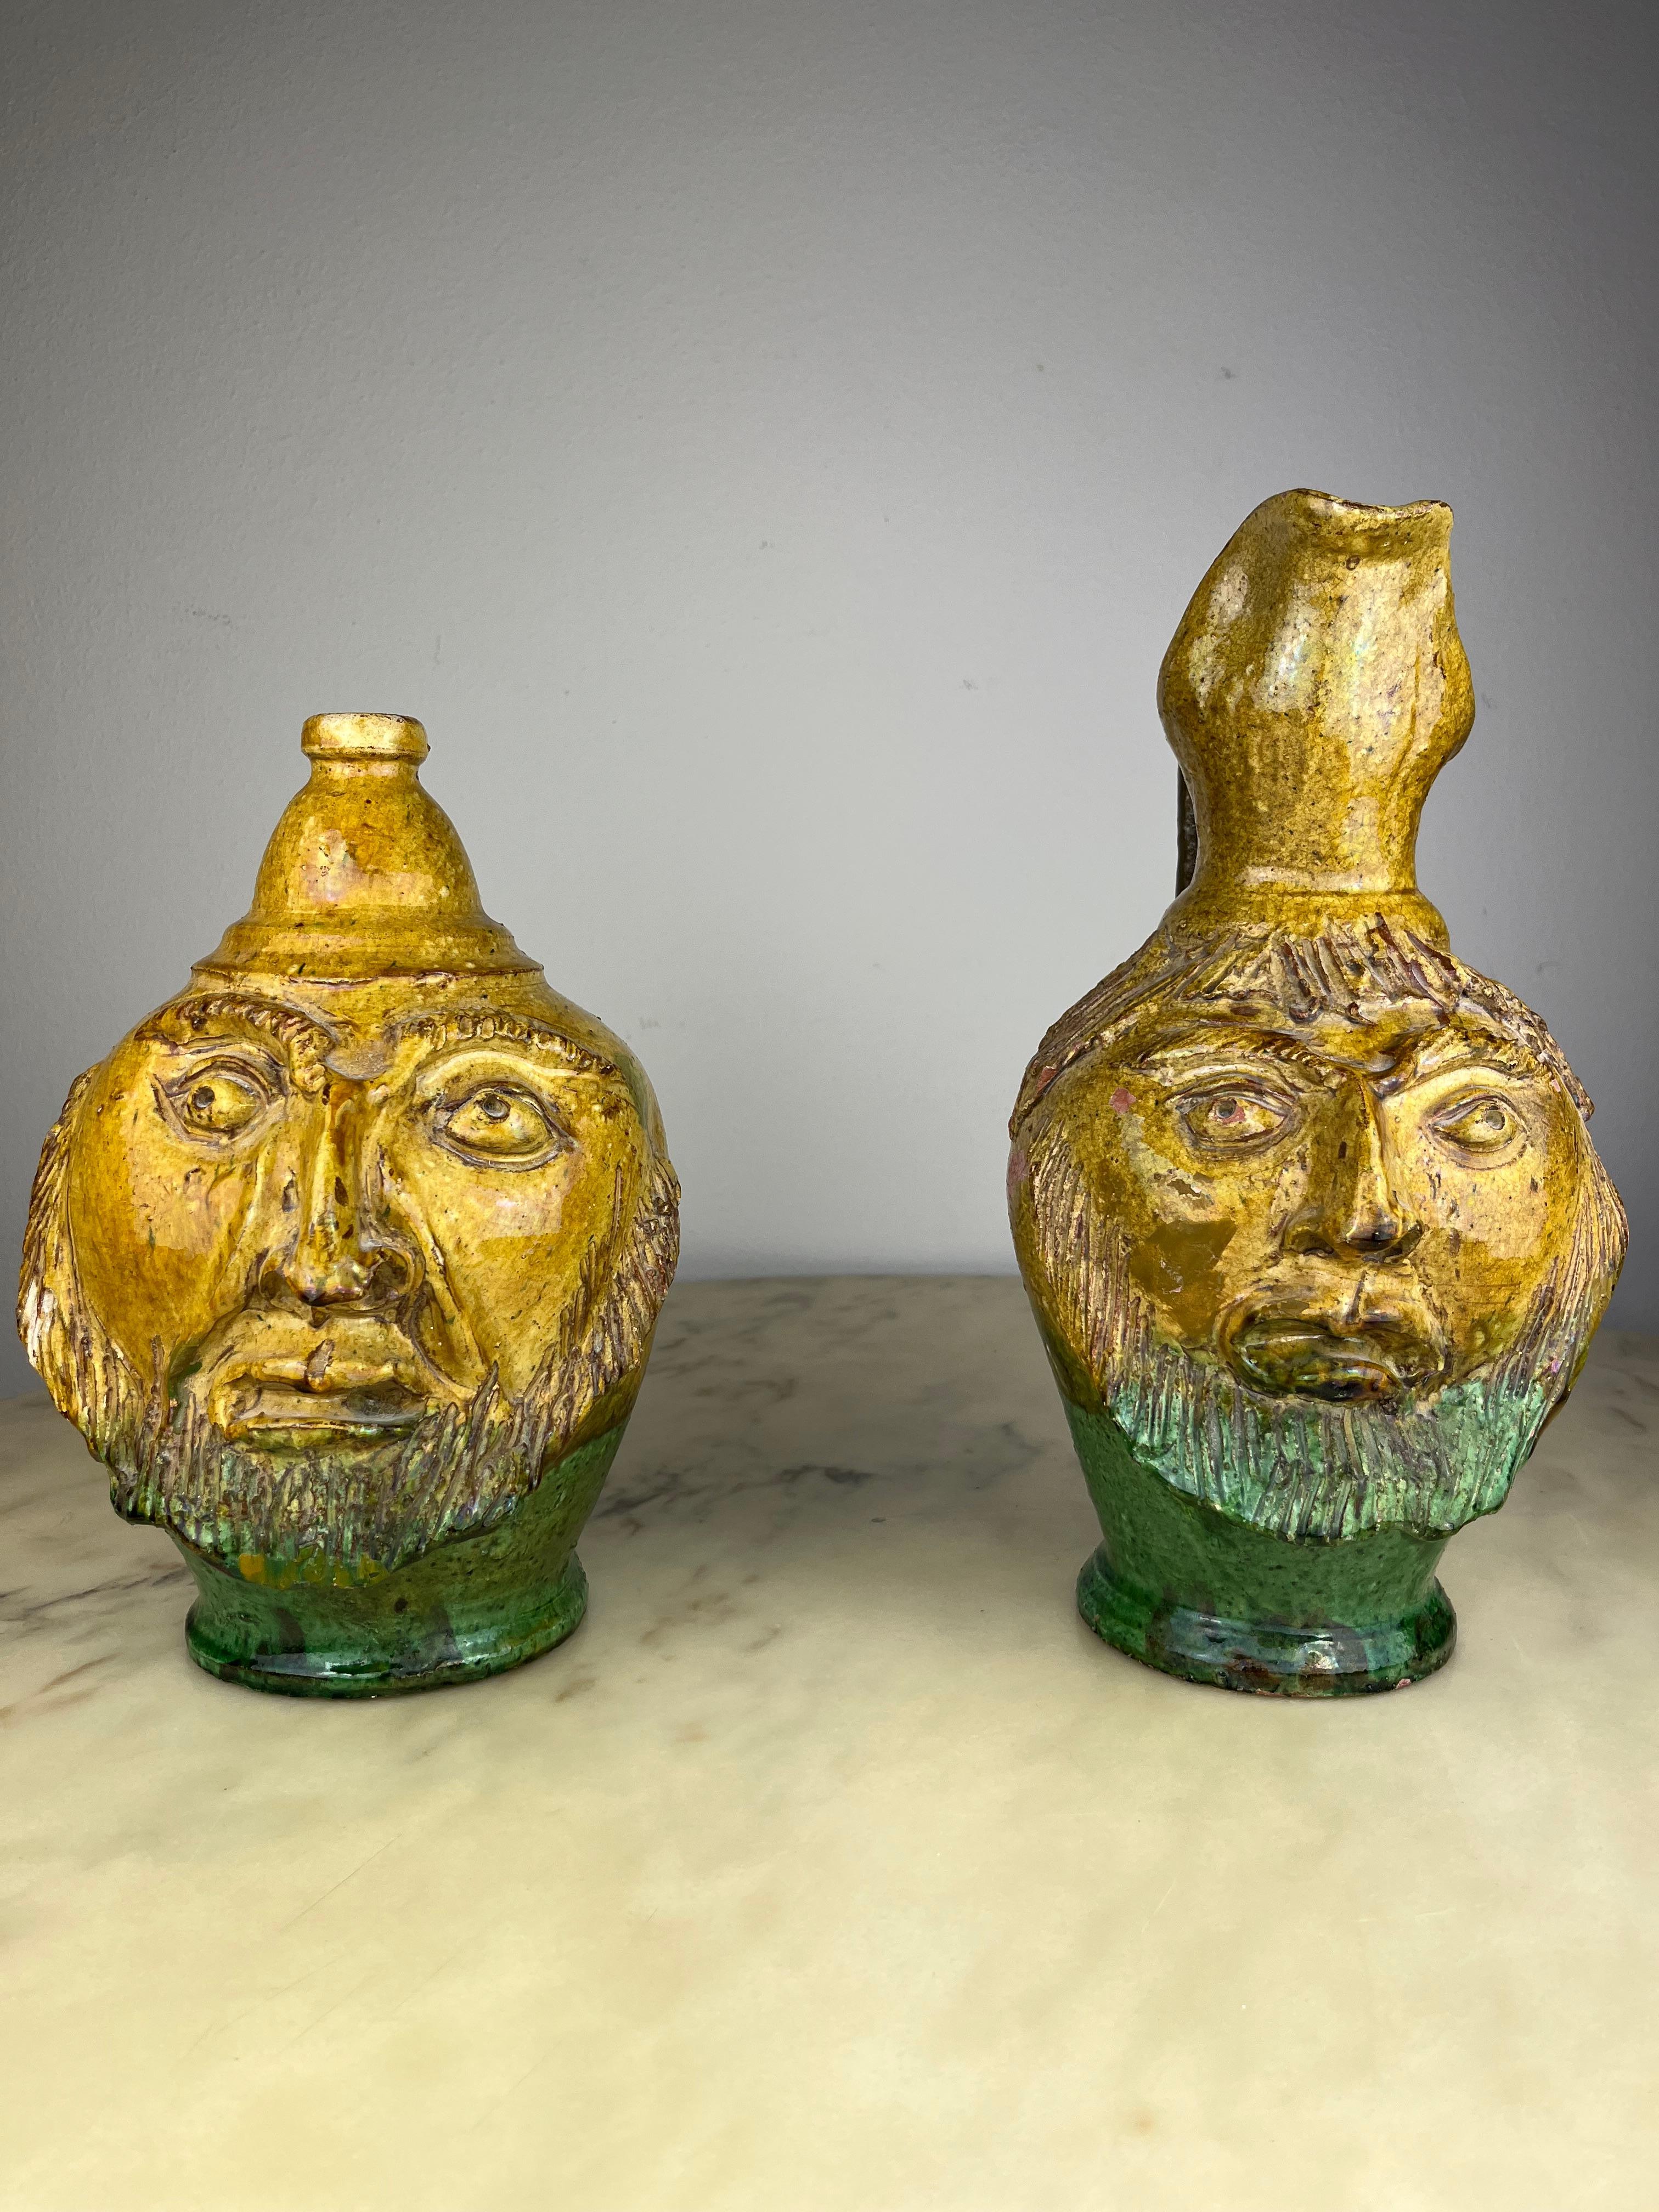 Pair of anthropomorphic jugs in glazed terracotta, Italy, 1930.
Found in a noble villa in the Sicilian hinterland.
Small shortcomings.
Objects that are unobtainable and extremely rare today.
One is 35 cm high and has a diameter of 19 cm. The